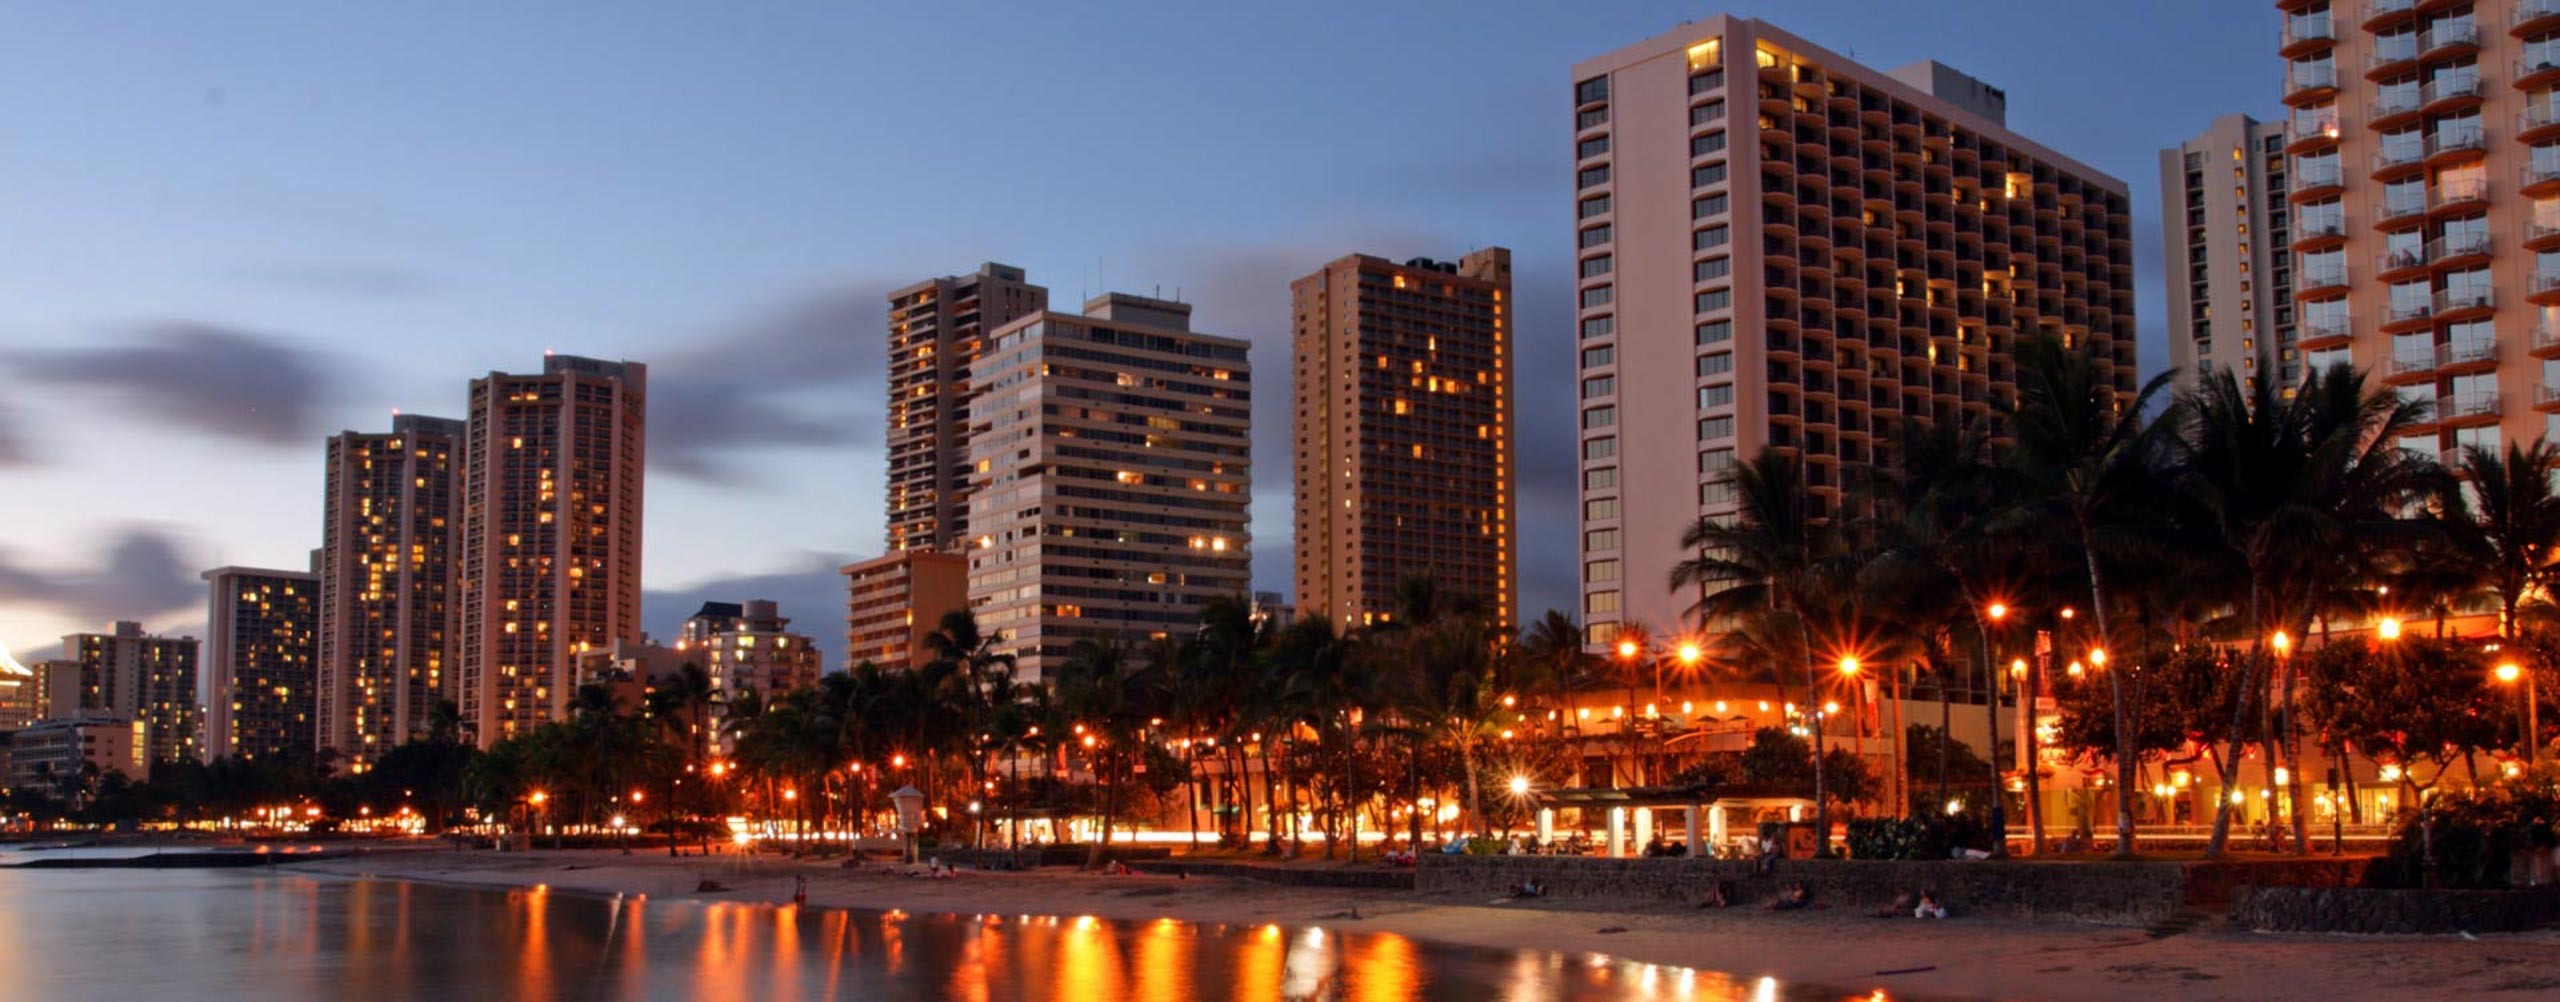 Best Places to Shop Louis Vuitton and Gucci in Honolulu